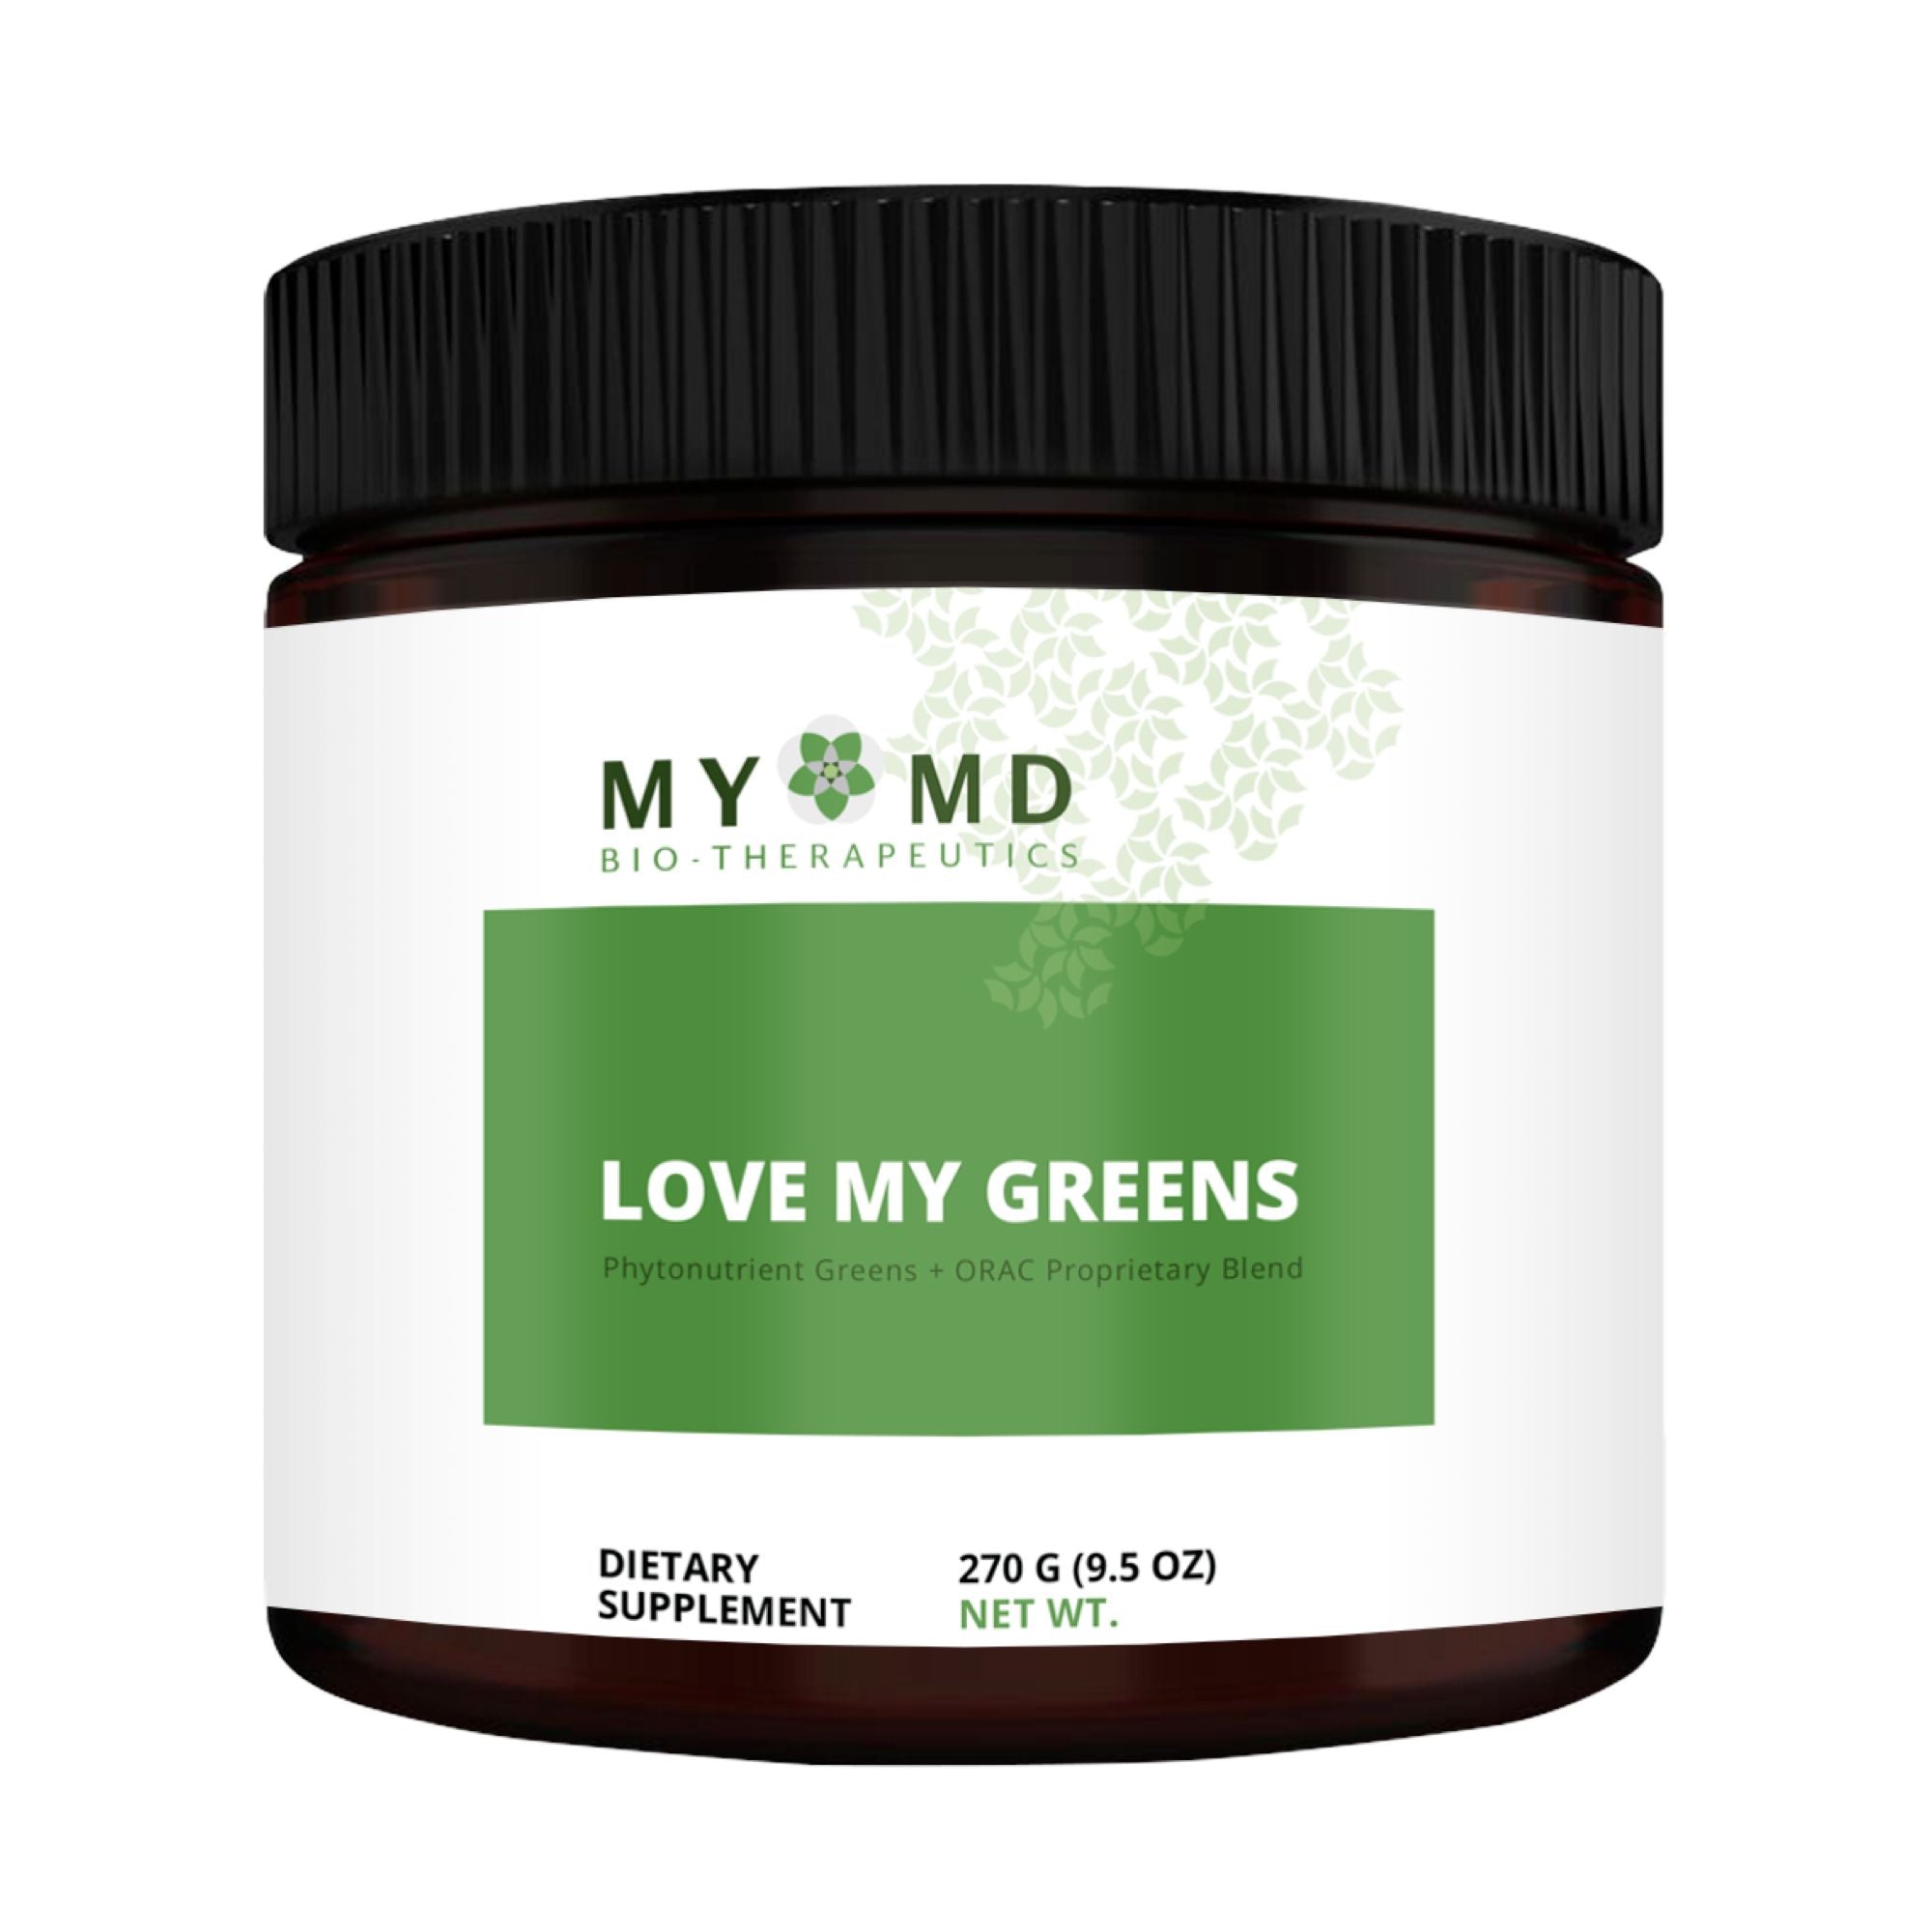 LOVE MY GREENS Phytonutrient powerhouse for liver, gut, and hormone balance